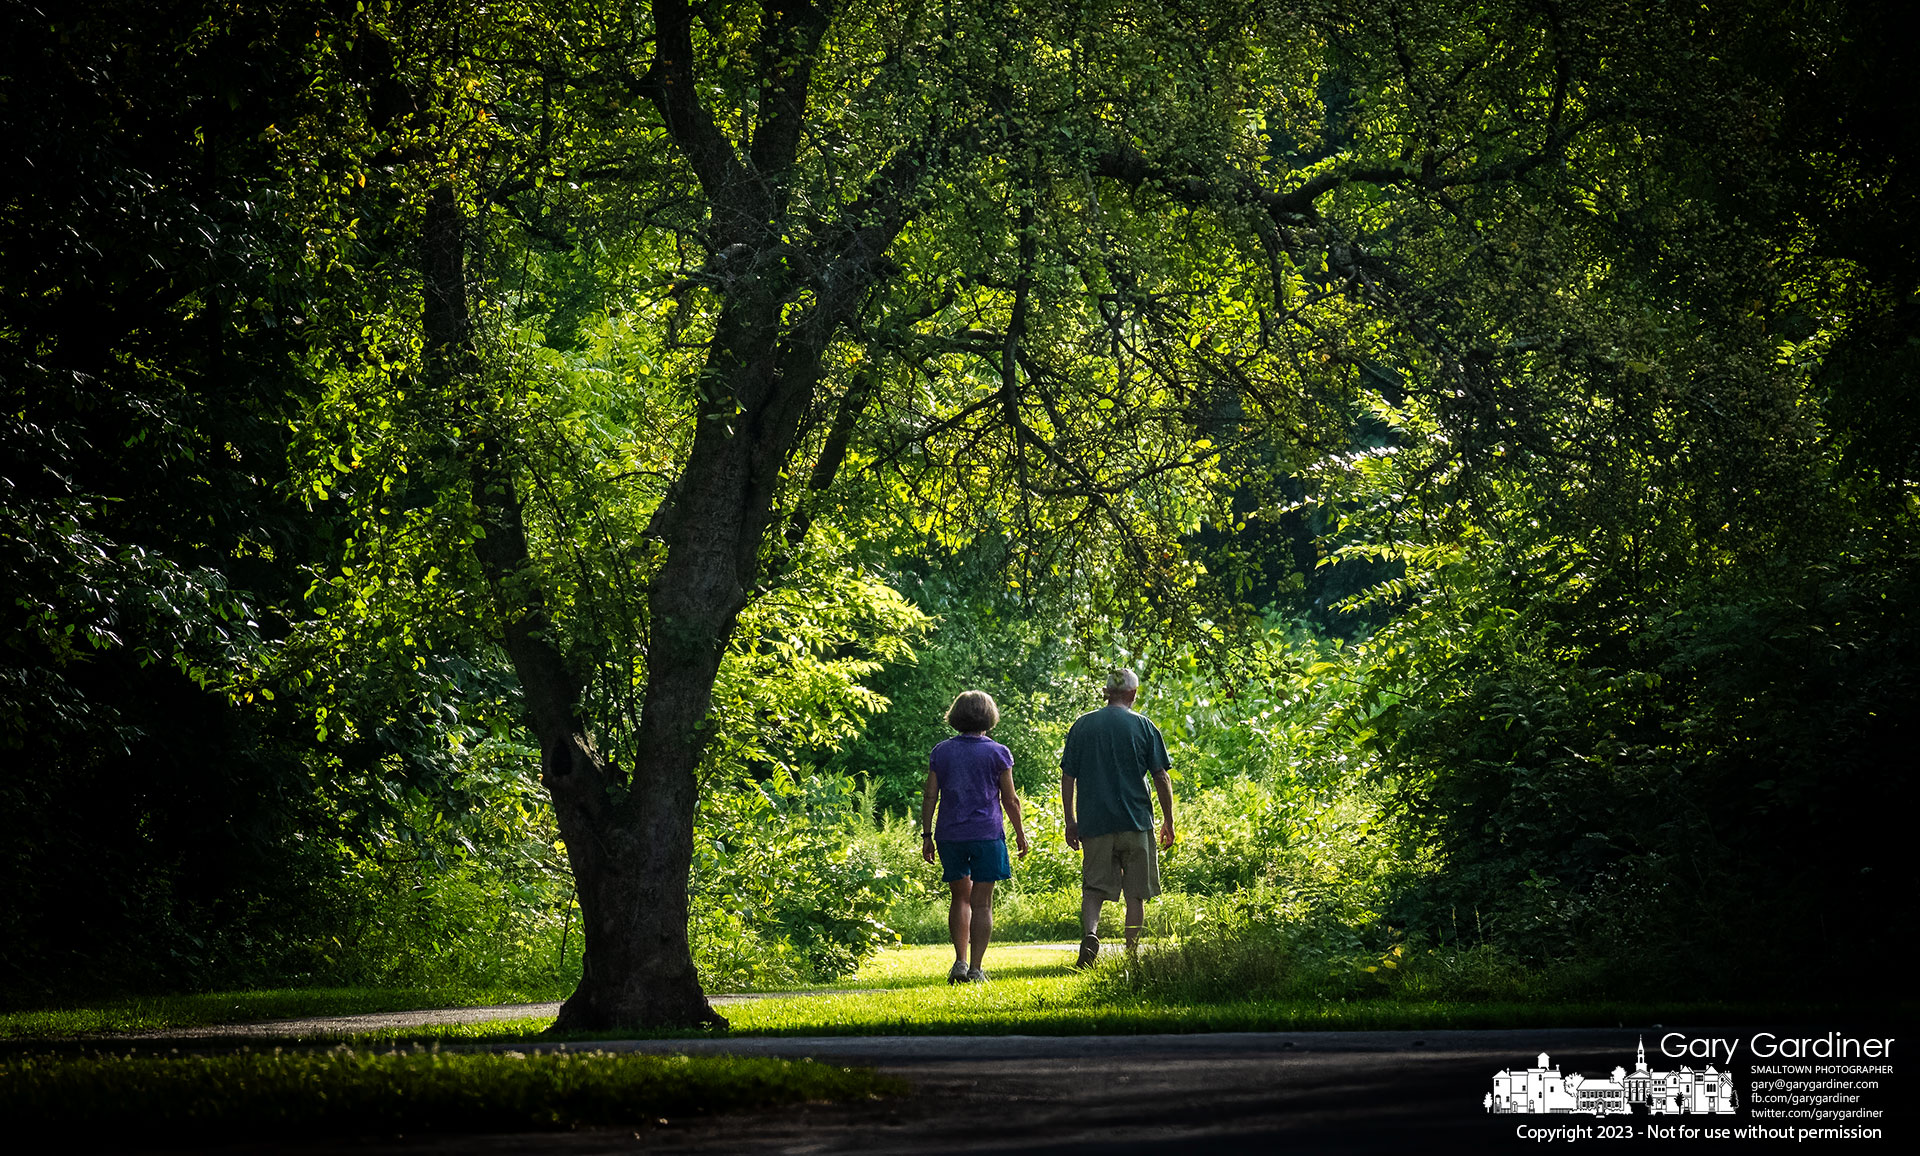 A couple steps into the afternoon sun to continue their walk from a more shaded walkway at Sharon Woods Metro Park Sunday. My Final Photo for August 13, 2023.